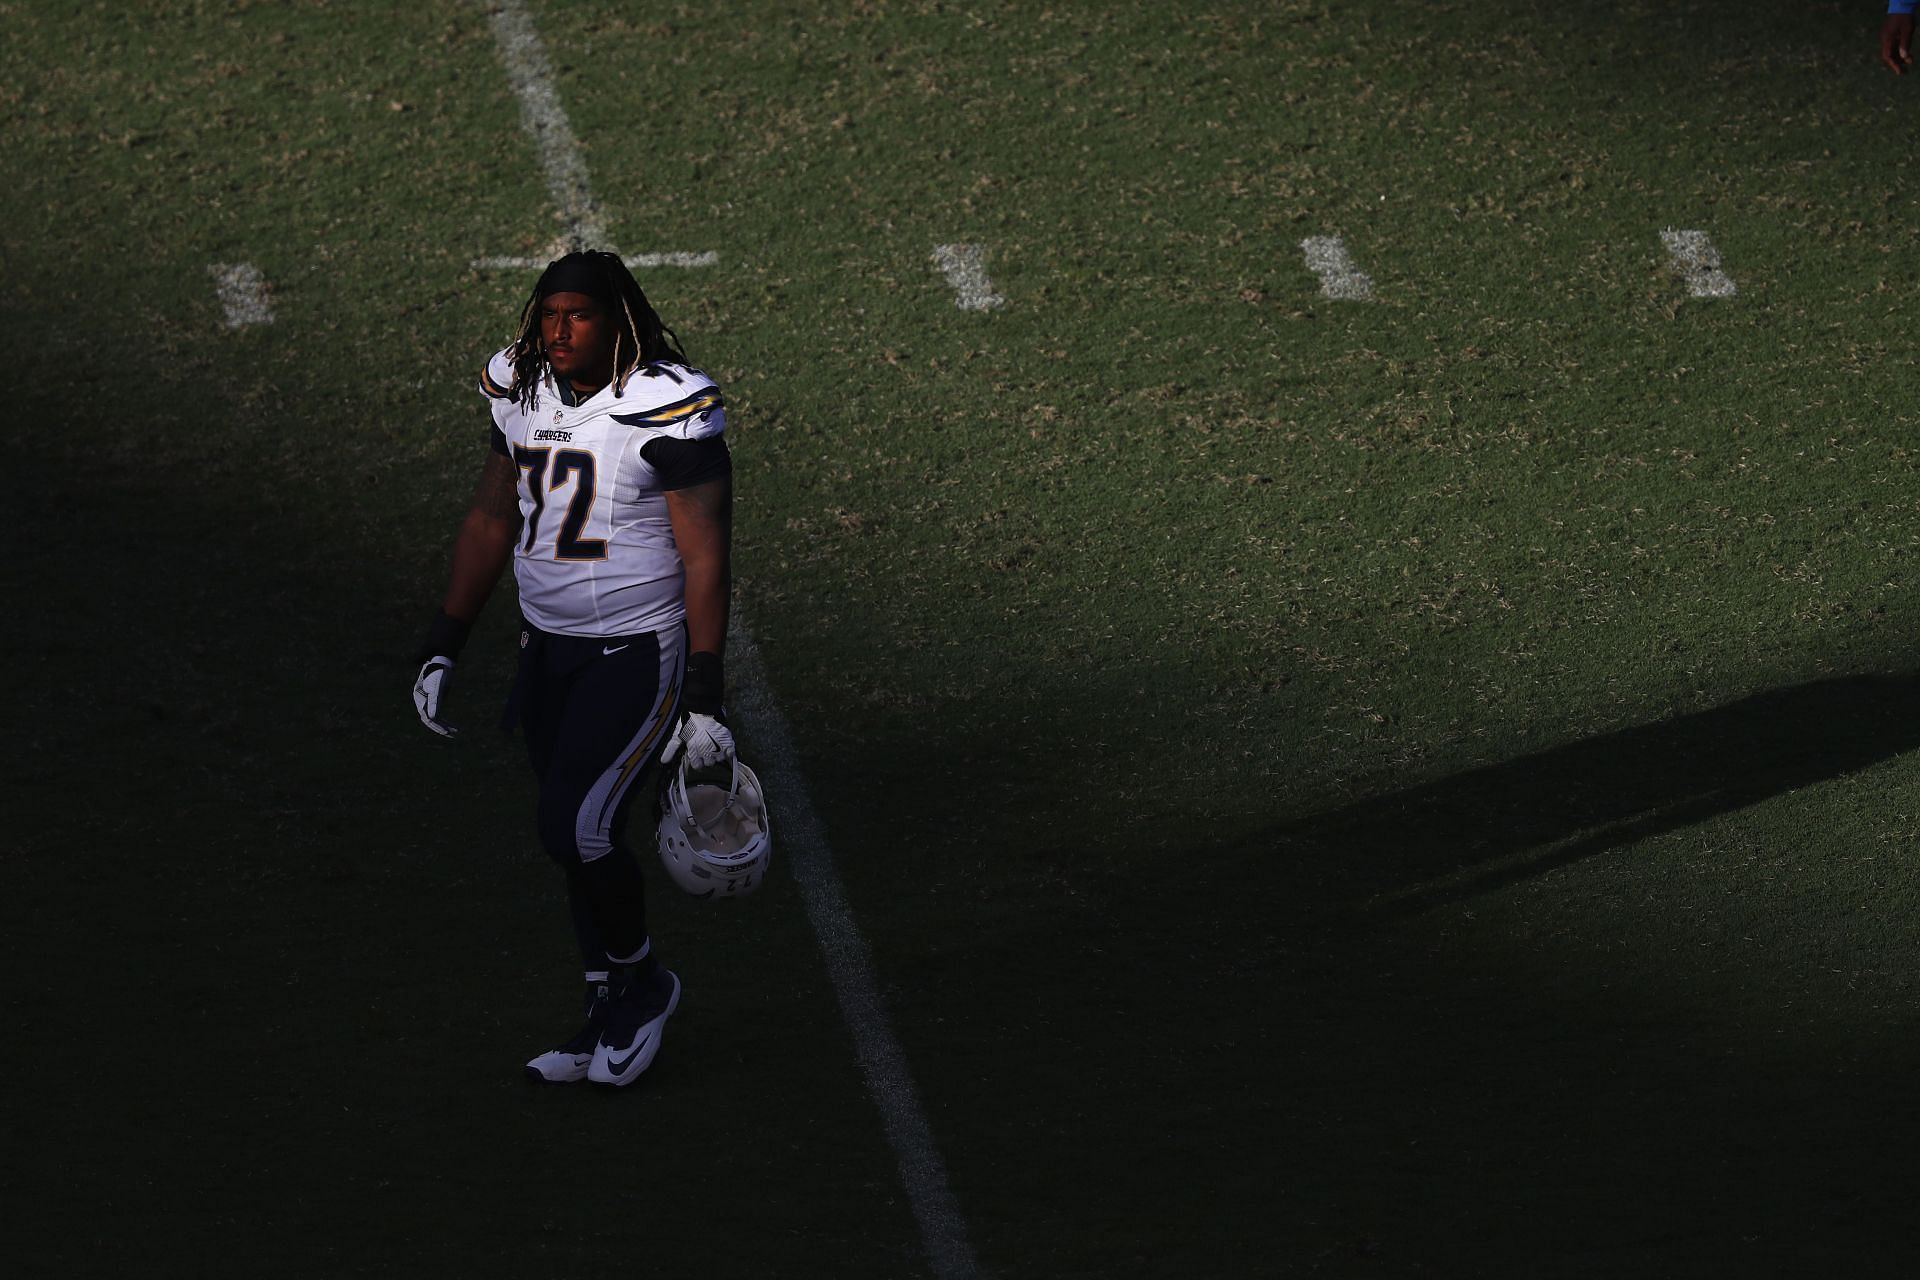 Joe Barksdale found out that he has autism after his last NFL season